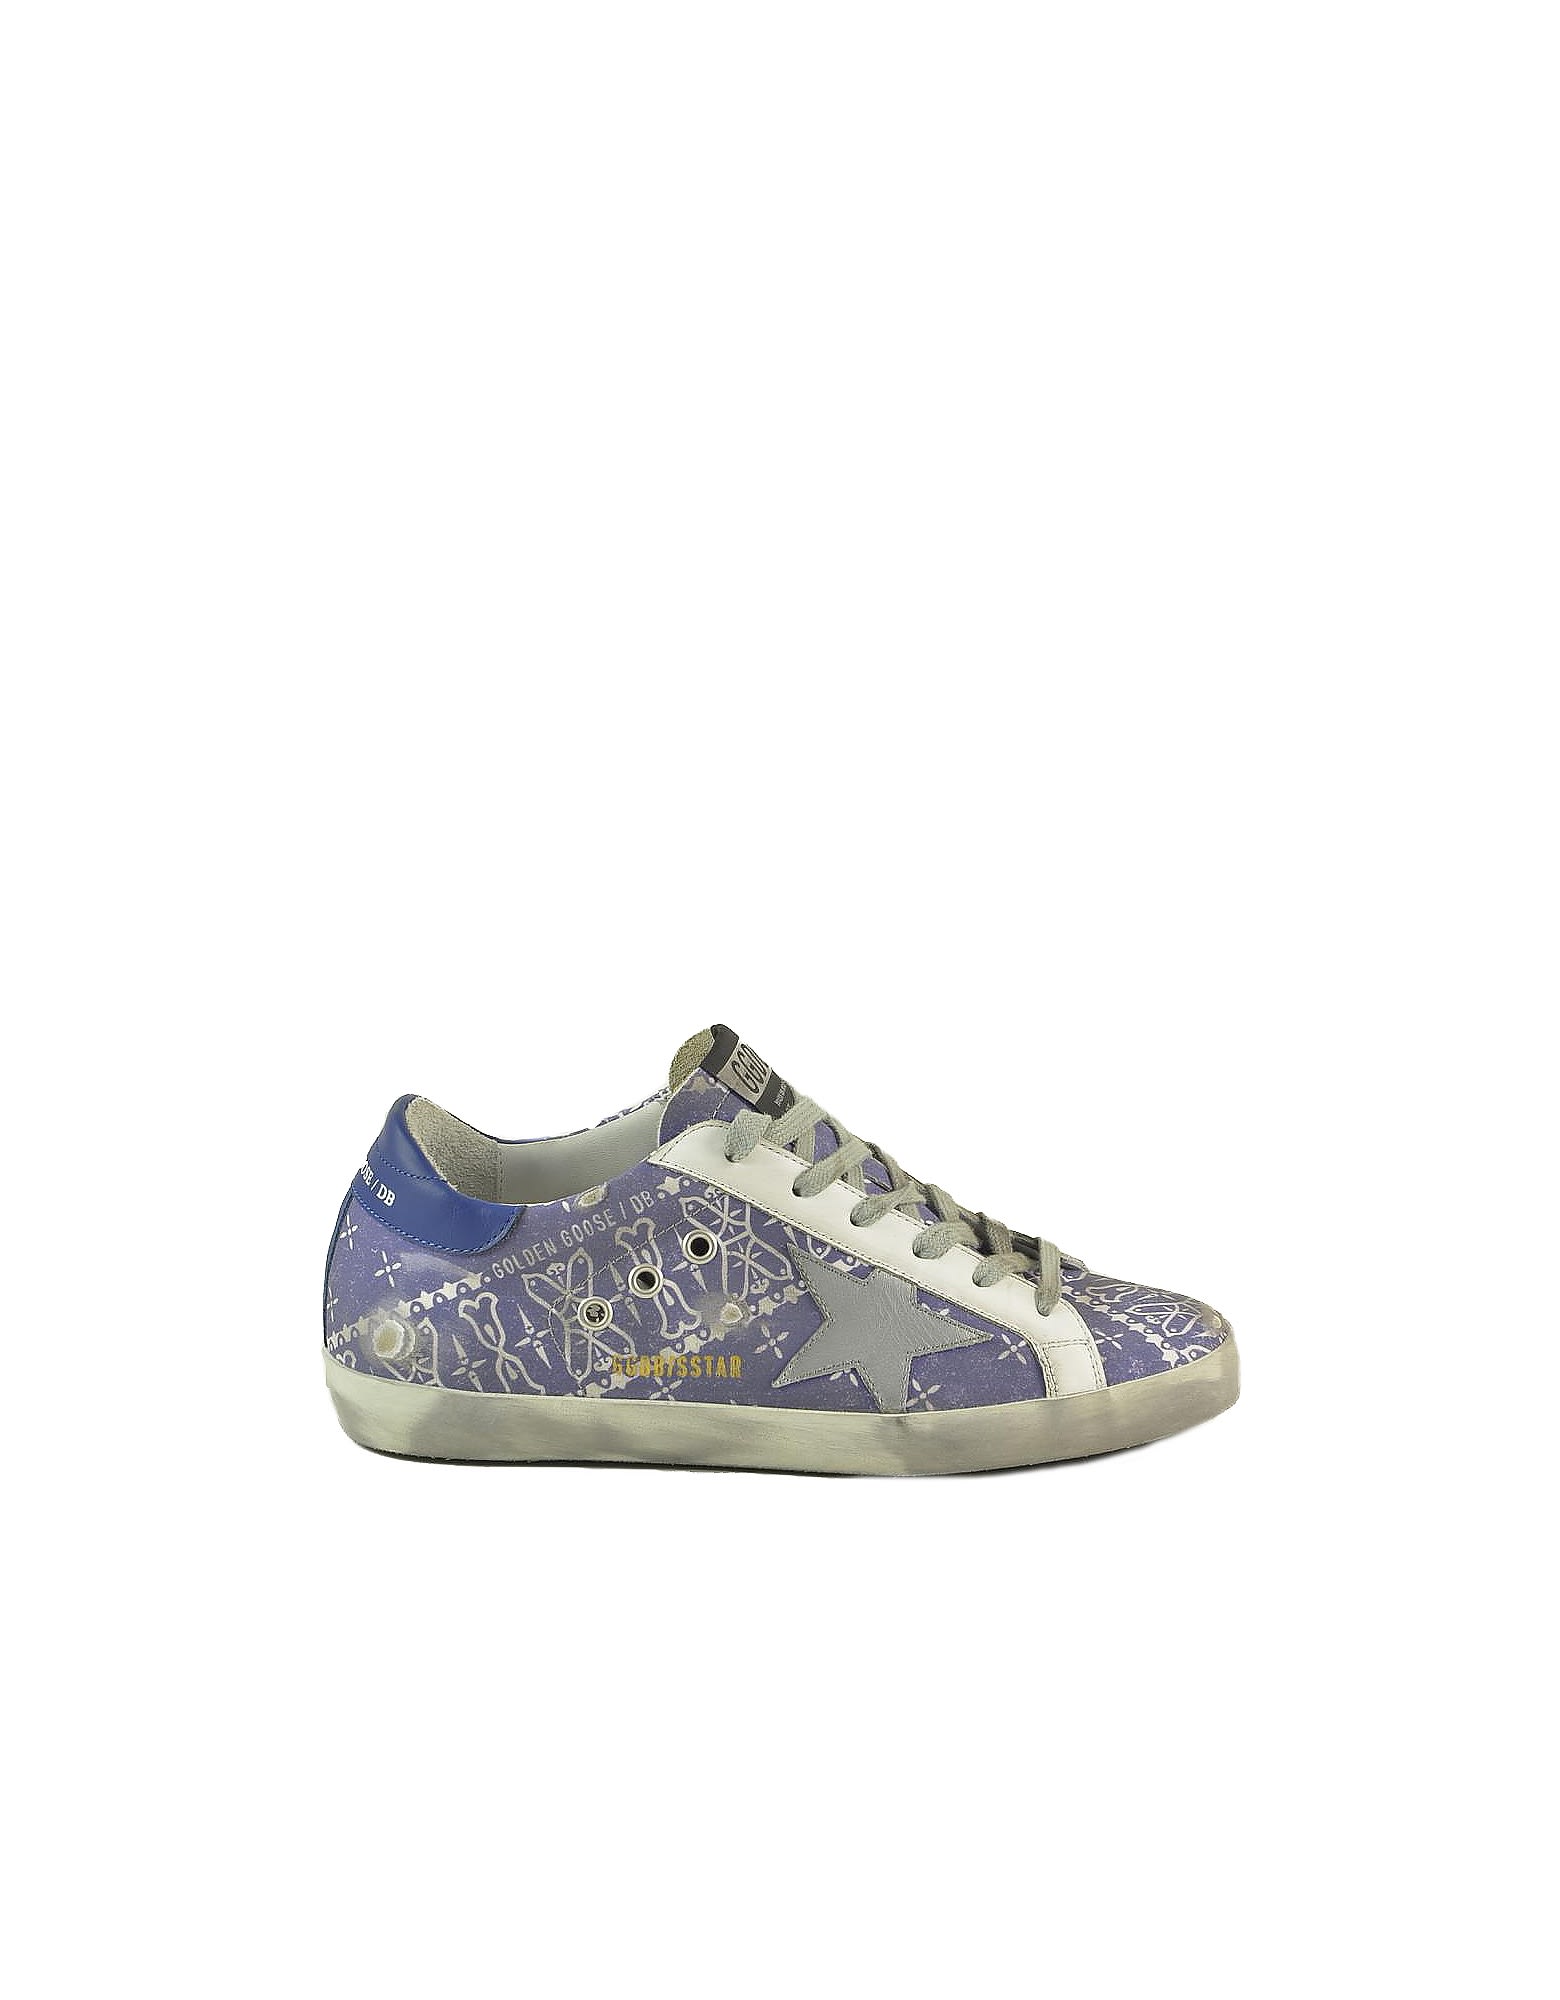 Golden Goose Distressed Blue And Silver Flat Sneakers